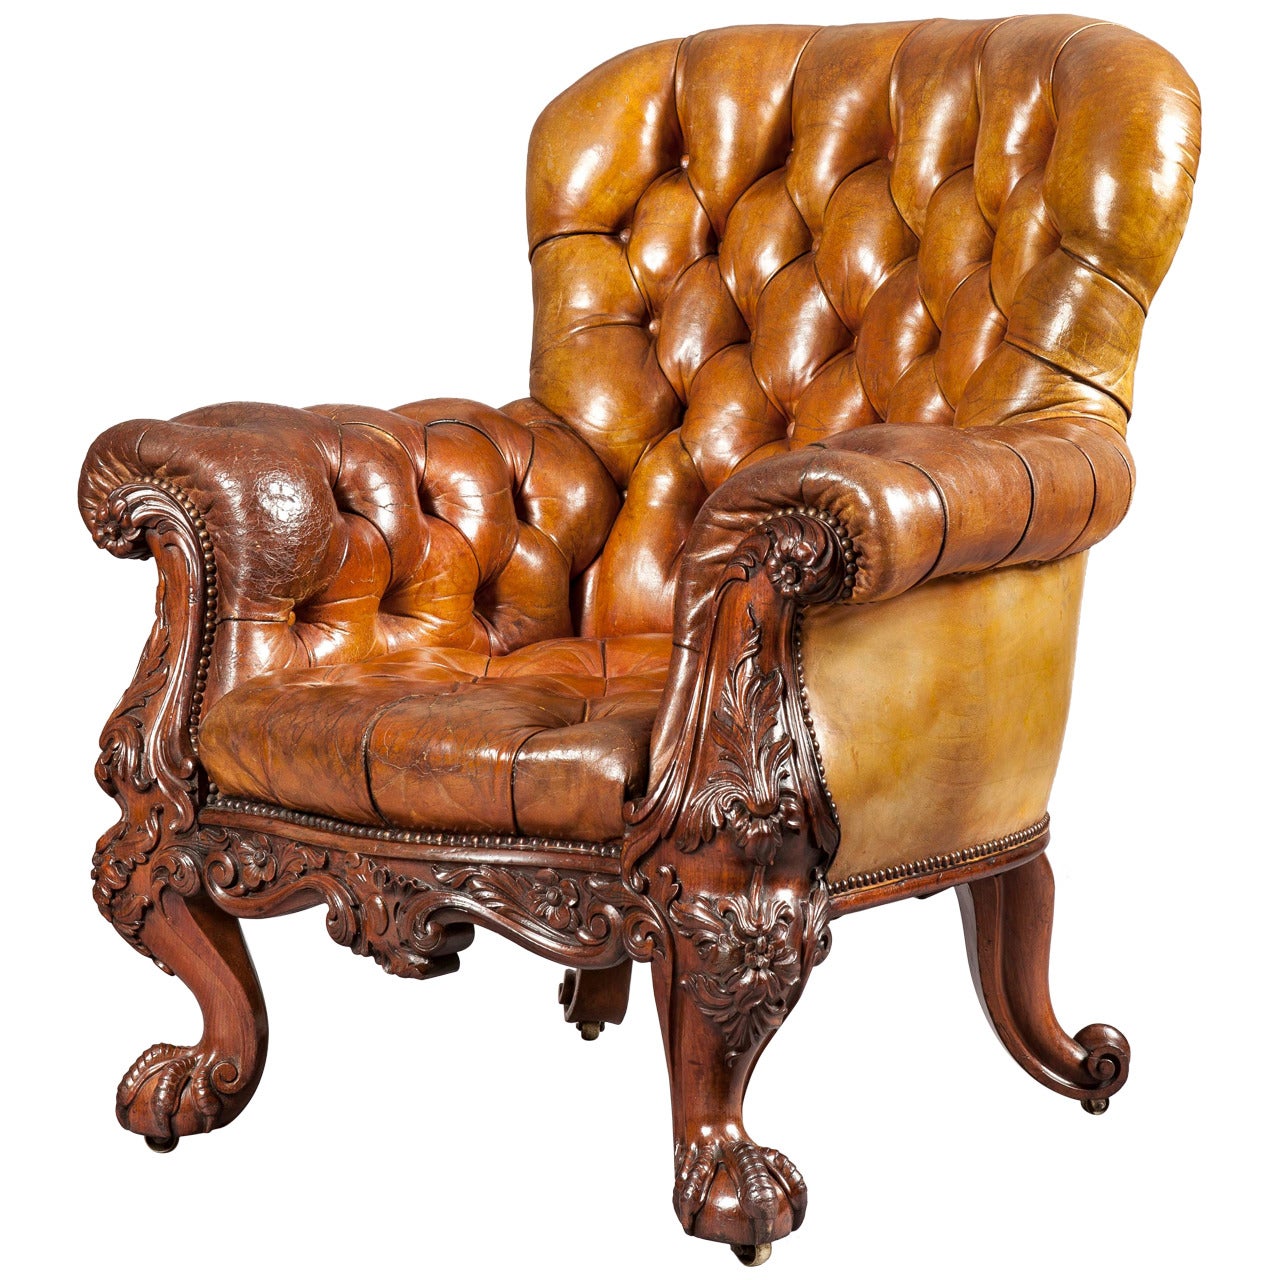 Gentleman’s Leather Library Chair Firmly Attributed to Gillows of Lancaster